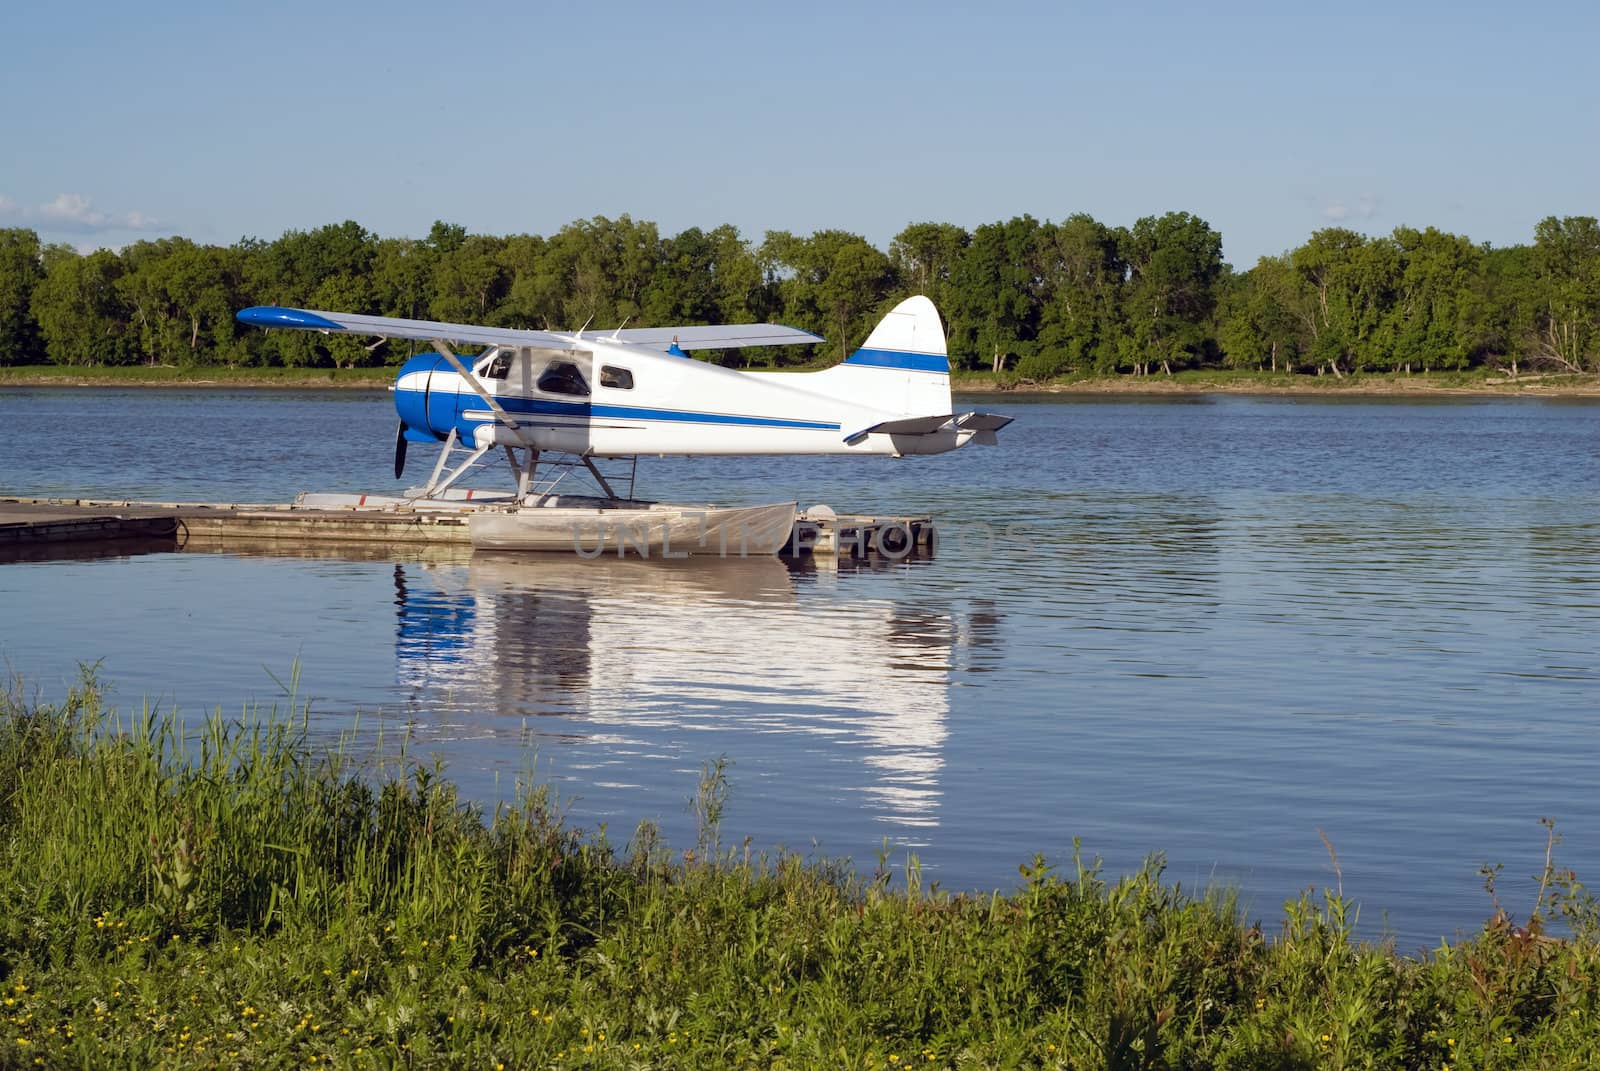 A small water plane tied to the dock on a river